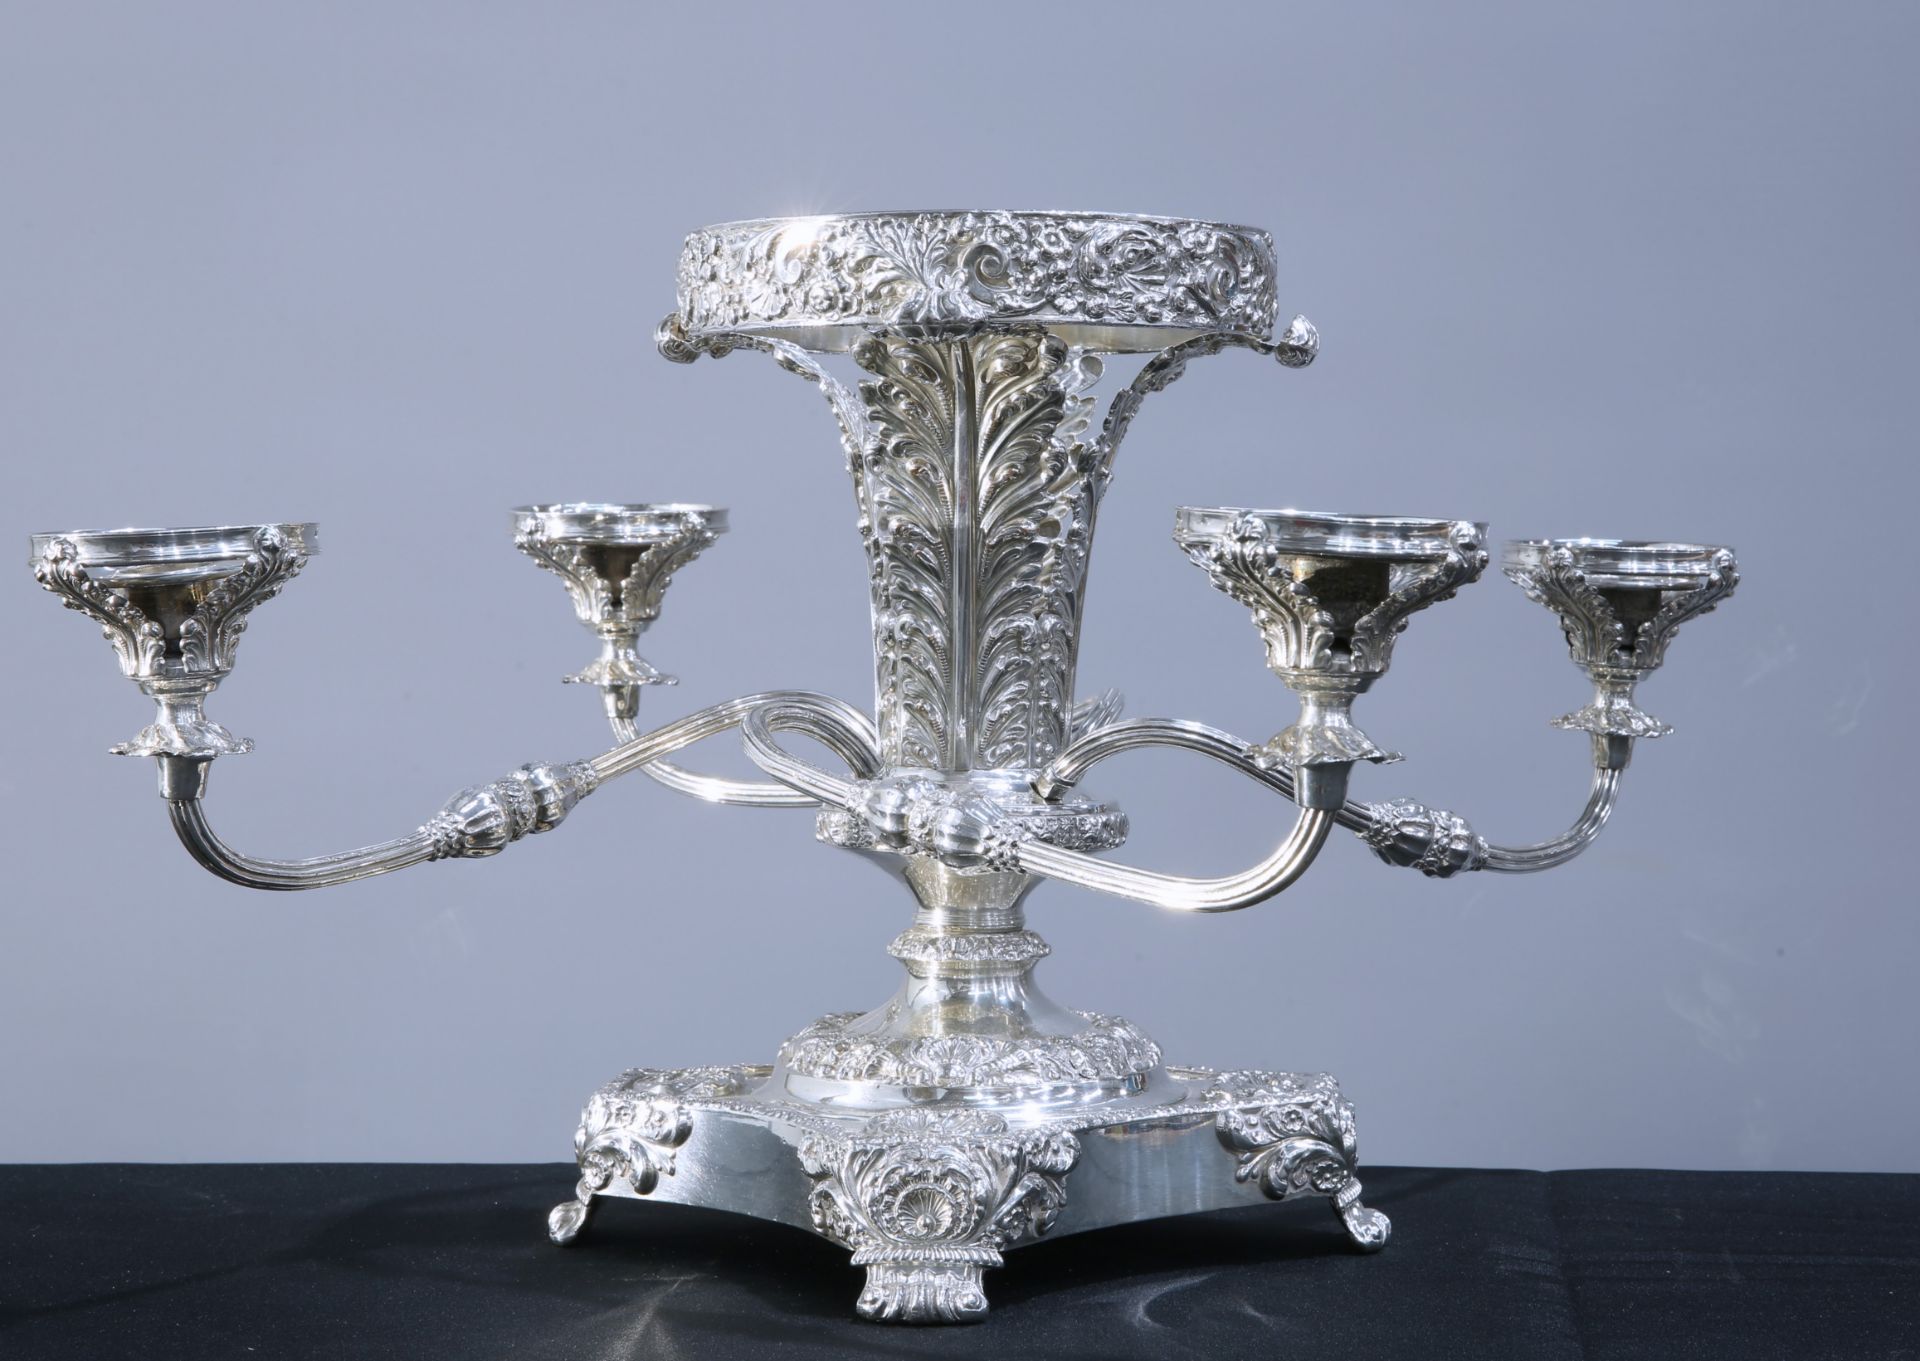 AN OLD SHEFFIELD PLATE EPERGNE